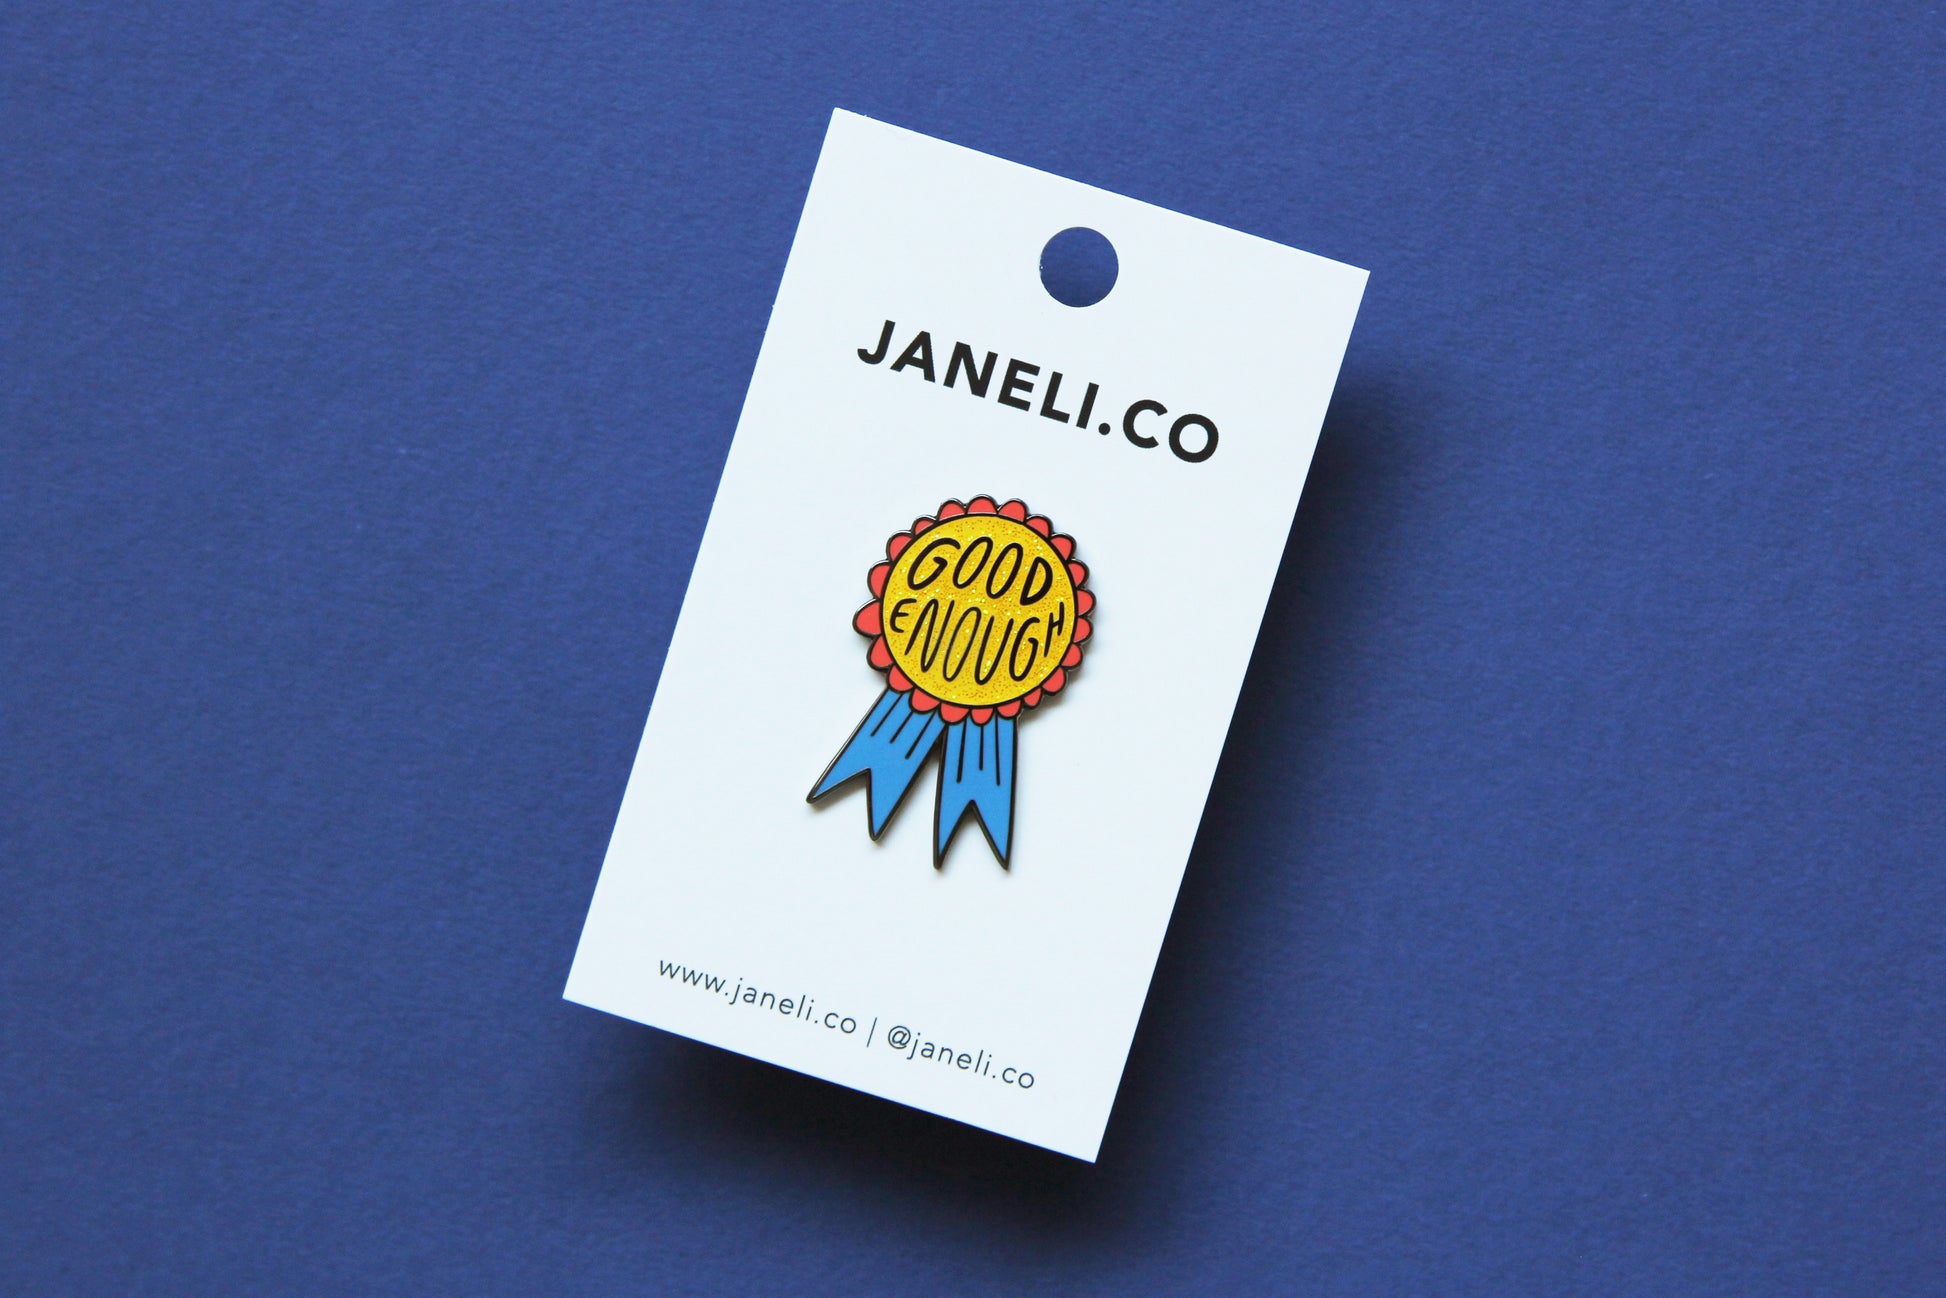 An enamel pin showing a glittery red and blue award ribbon that says "Good Enough" on a white JaneLi.Co backing card over a blue background.